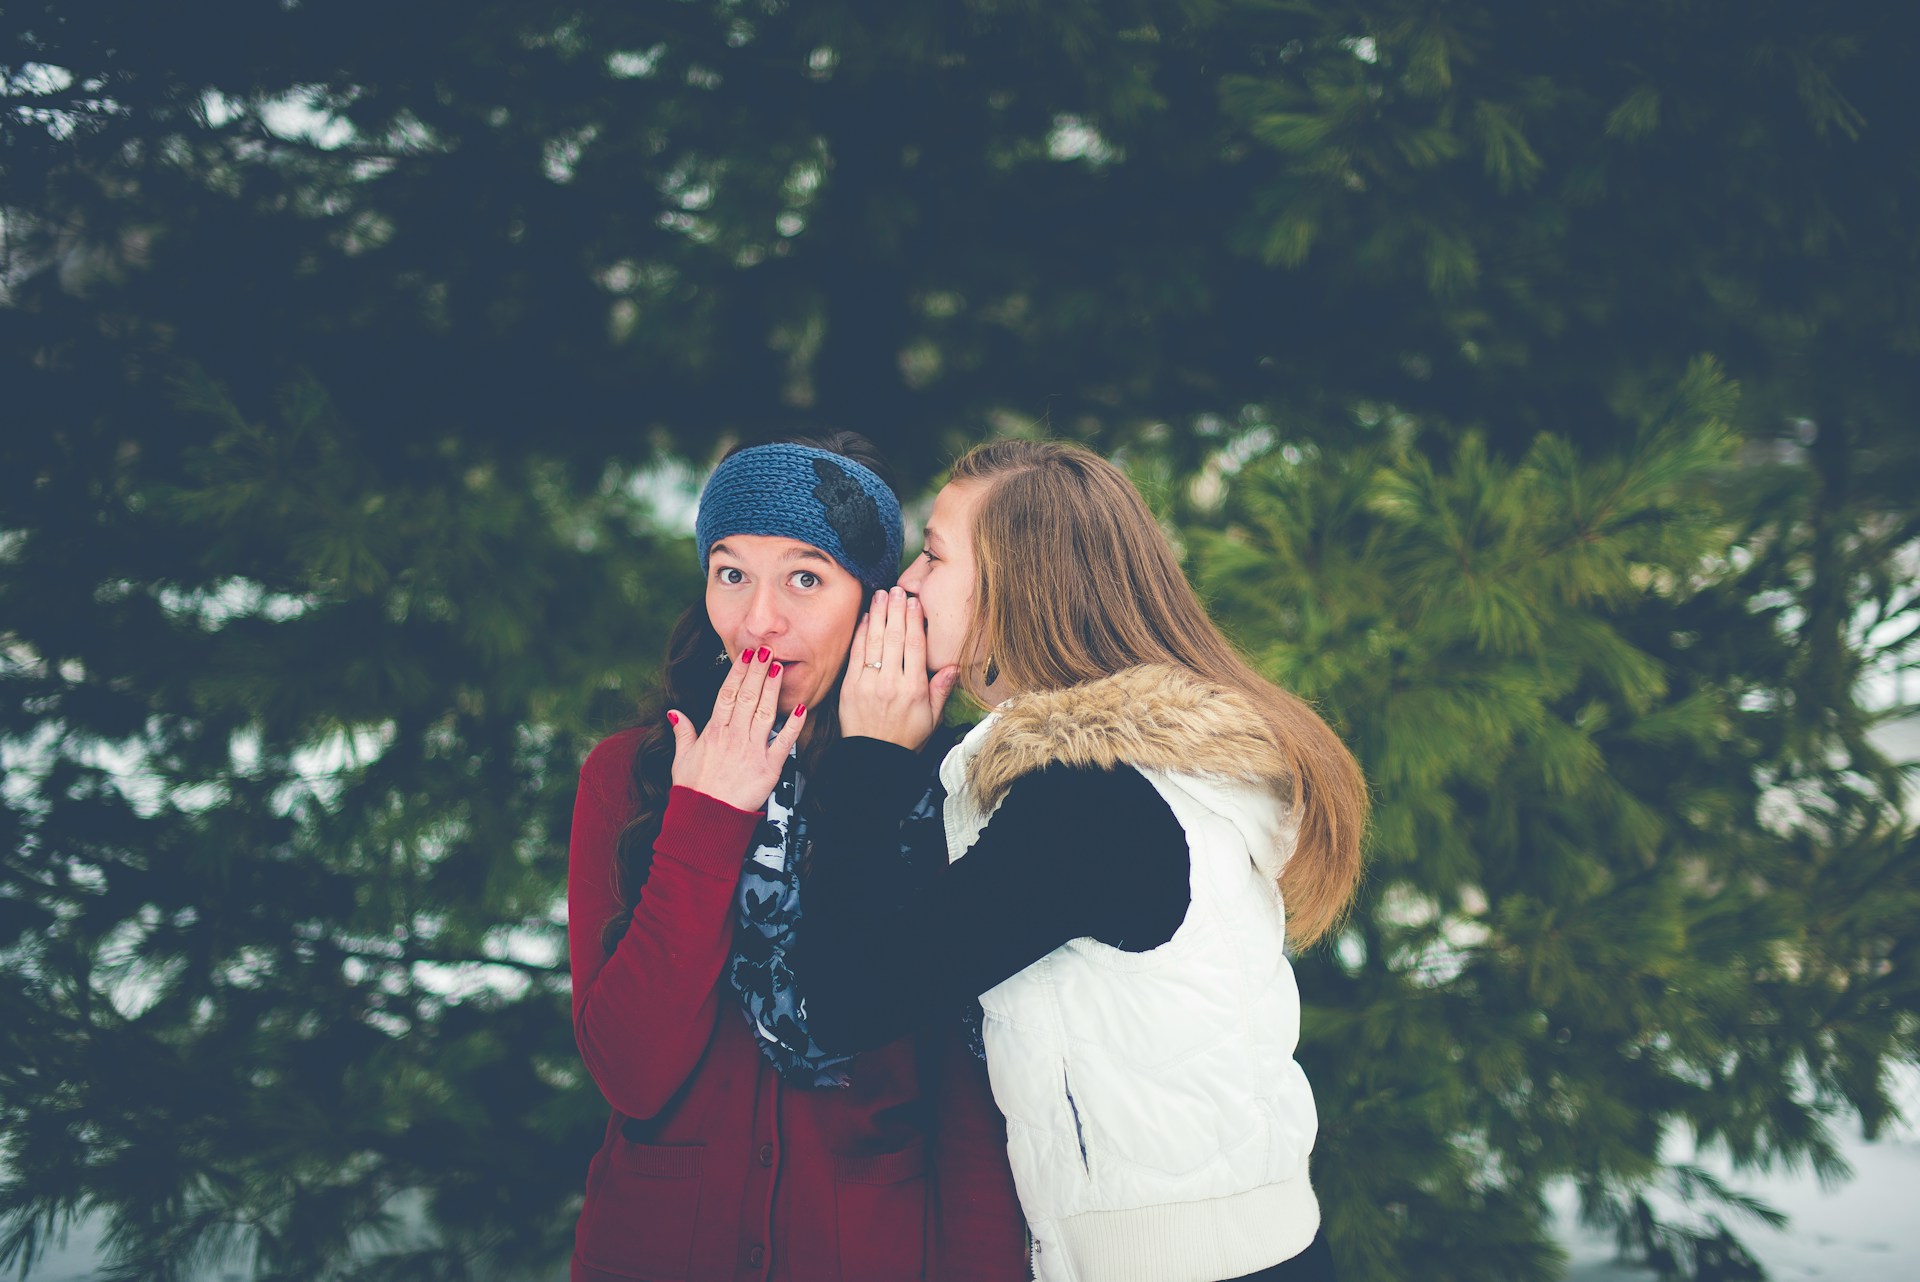 Photo of two people in  the woods. The person on the right is whispering into the person on the left's ear. The person on the left is looking at the camera and covering their mouth in a feigned expression of scandalous surprise.